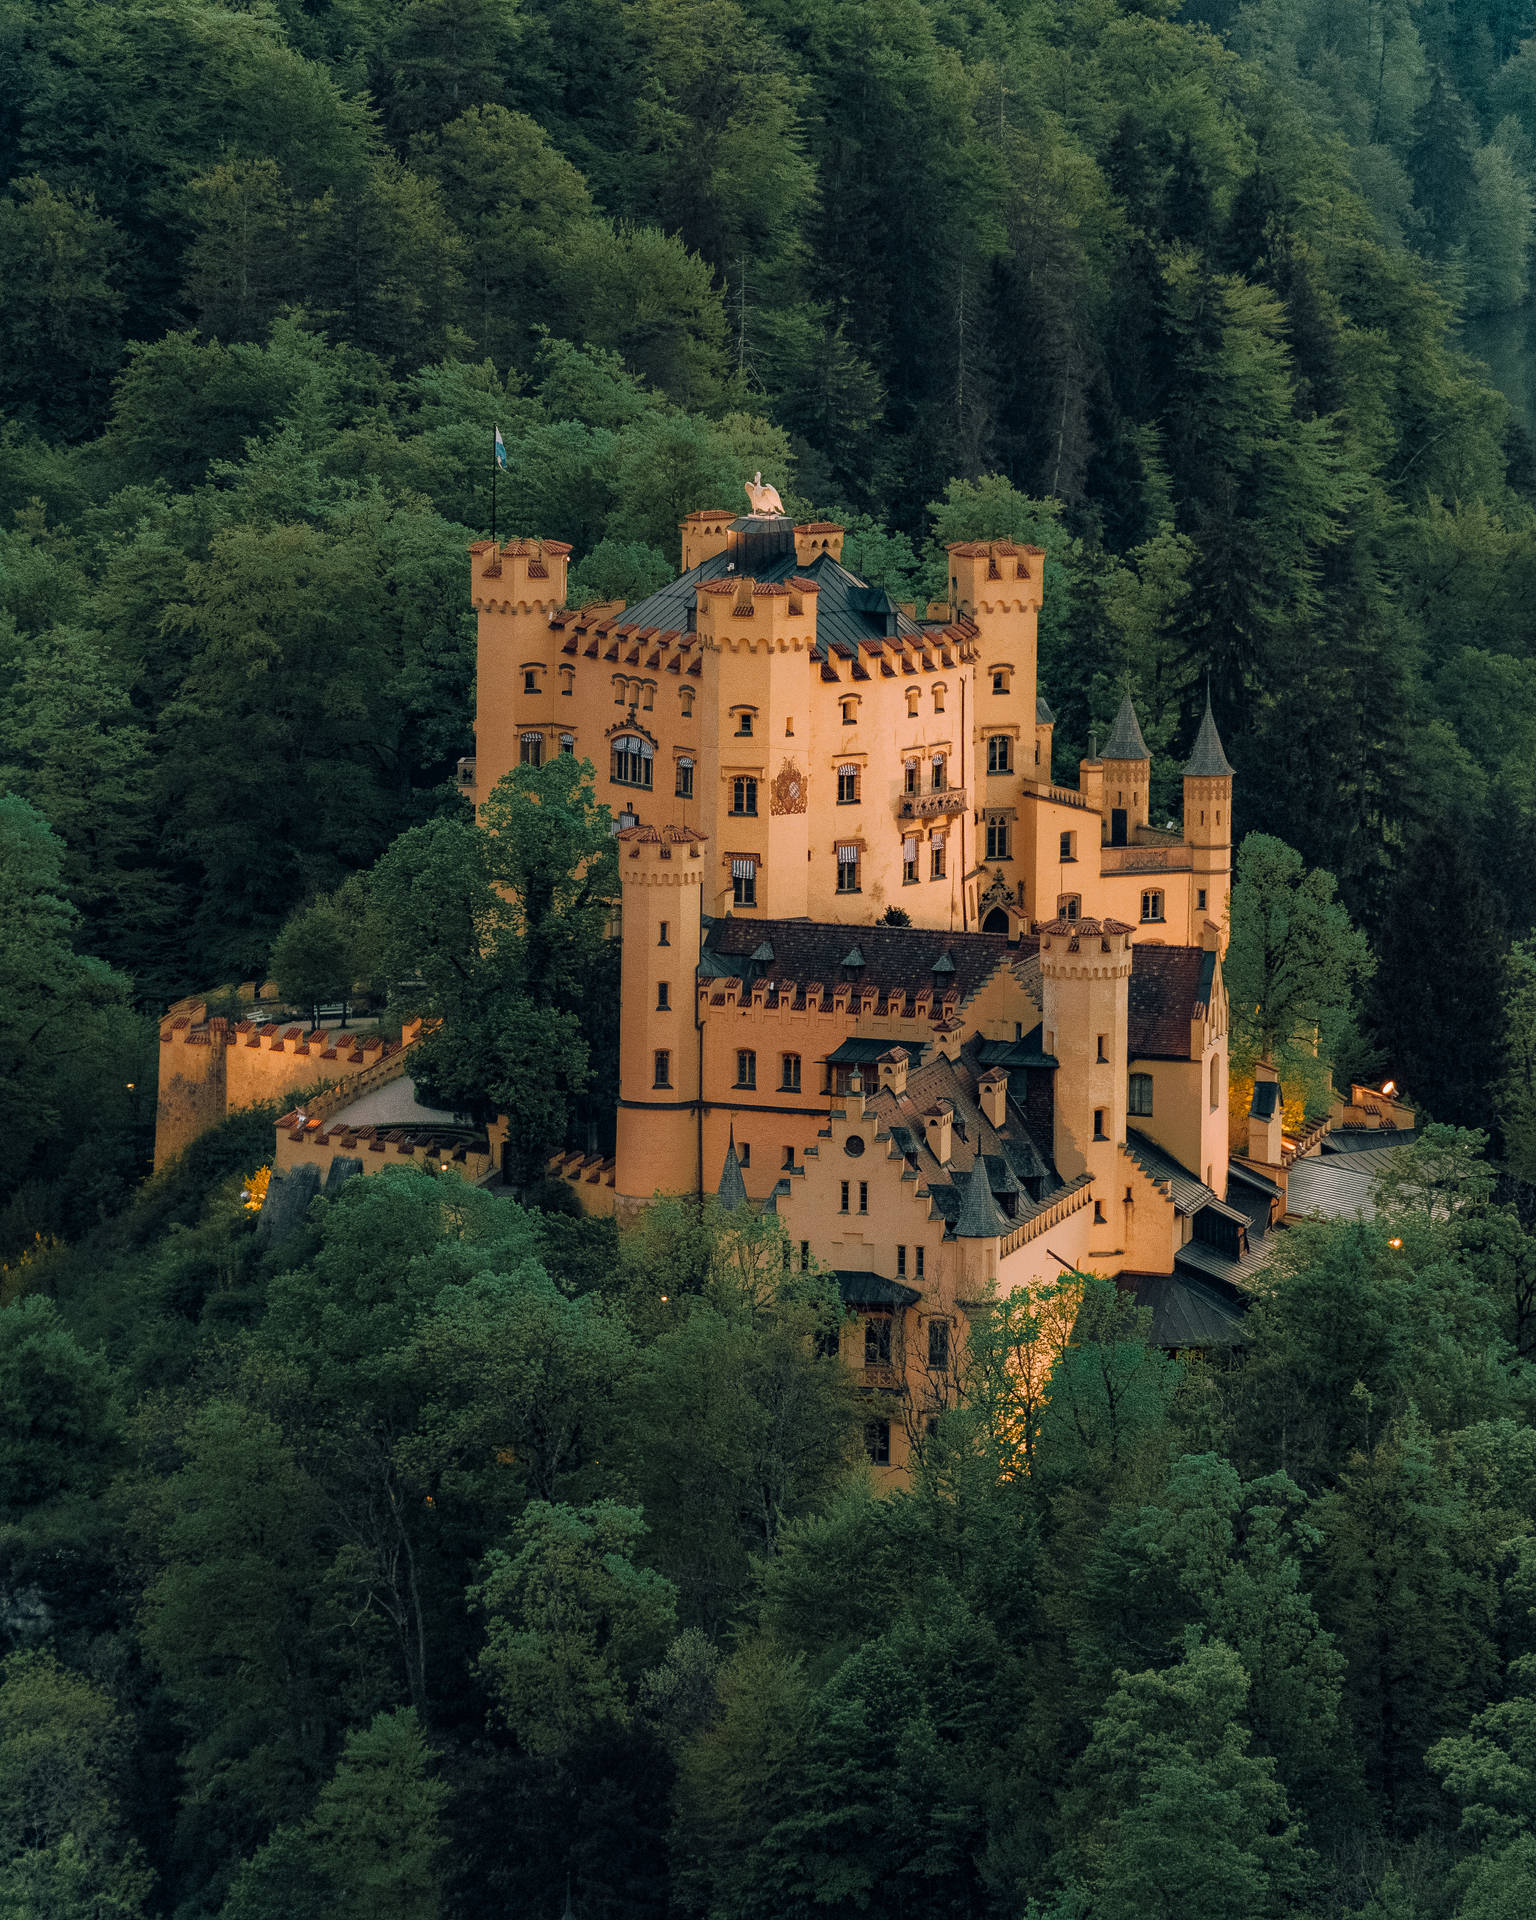 Germany's Secluded Massive Castle Picture